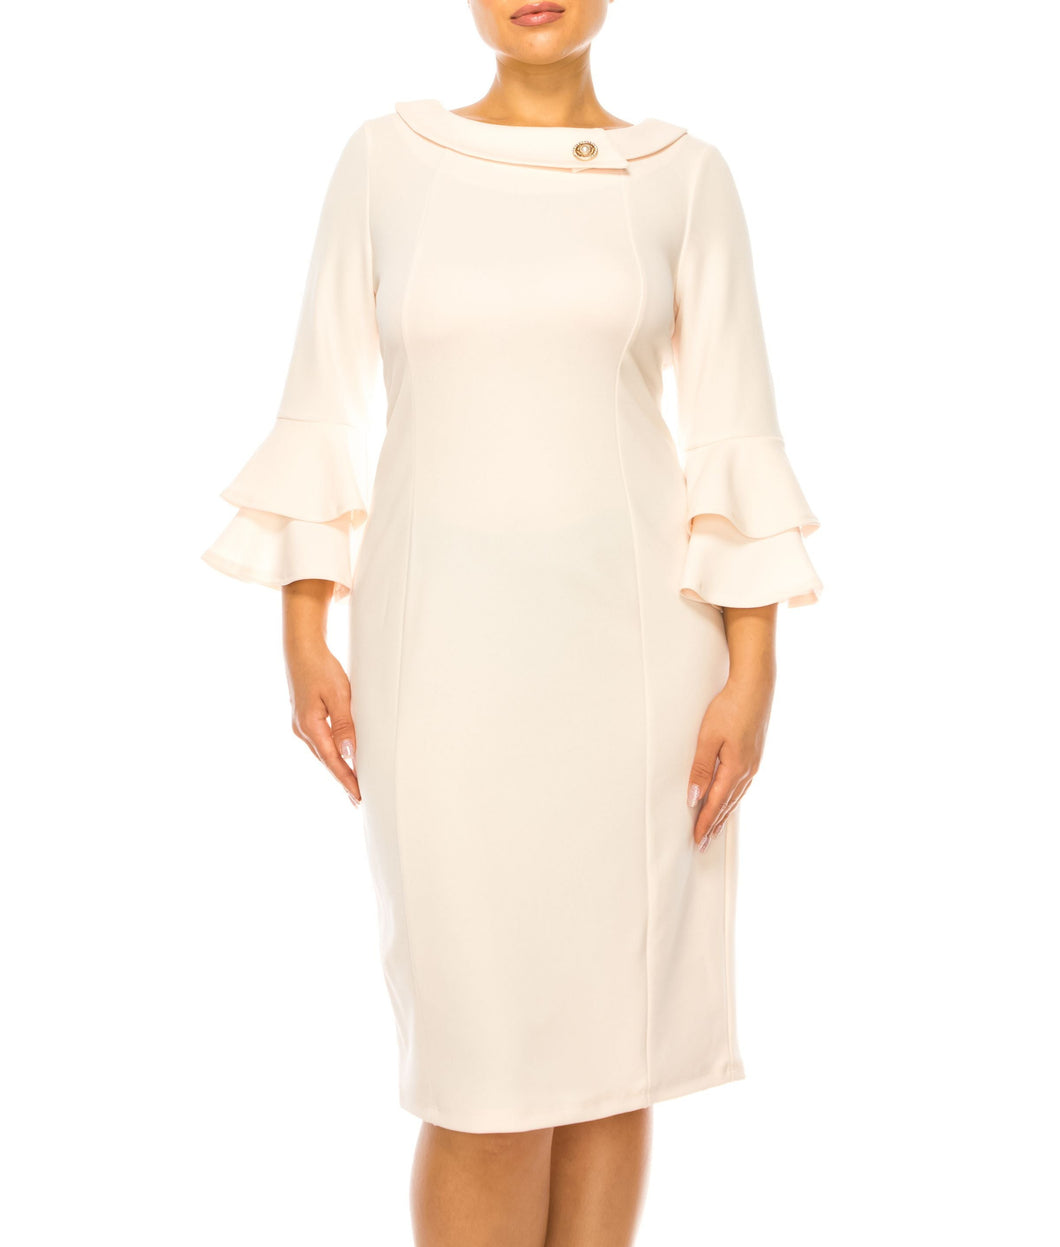 Jessica Rose, Peach Collared & Bell Sleeve Day Dress 12 & 14 Remaining! Women's Mother of the Bride, Modest Apparel